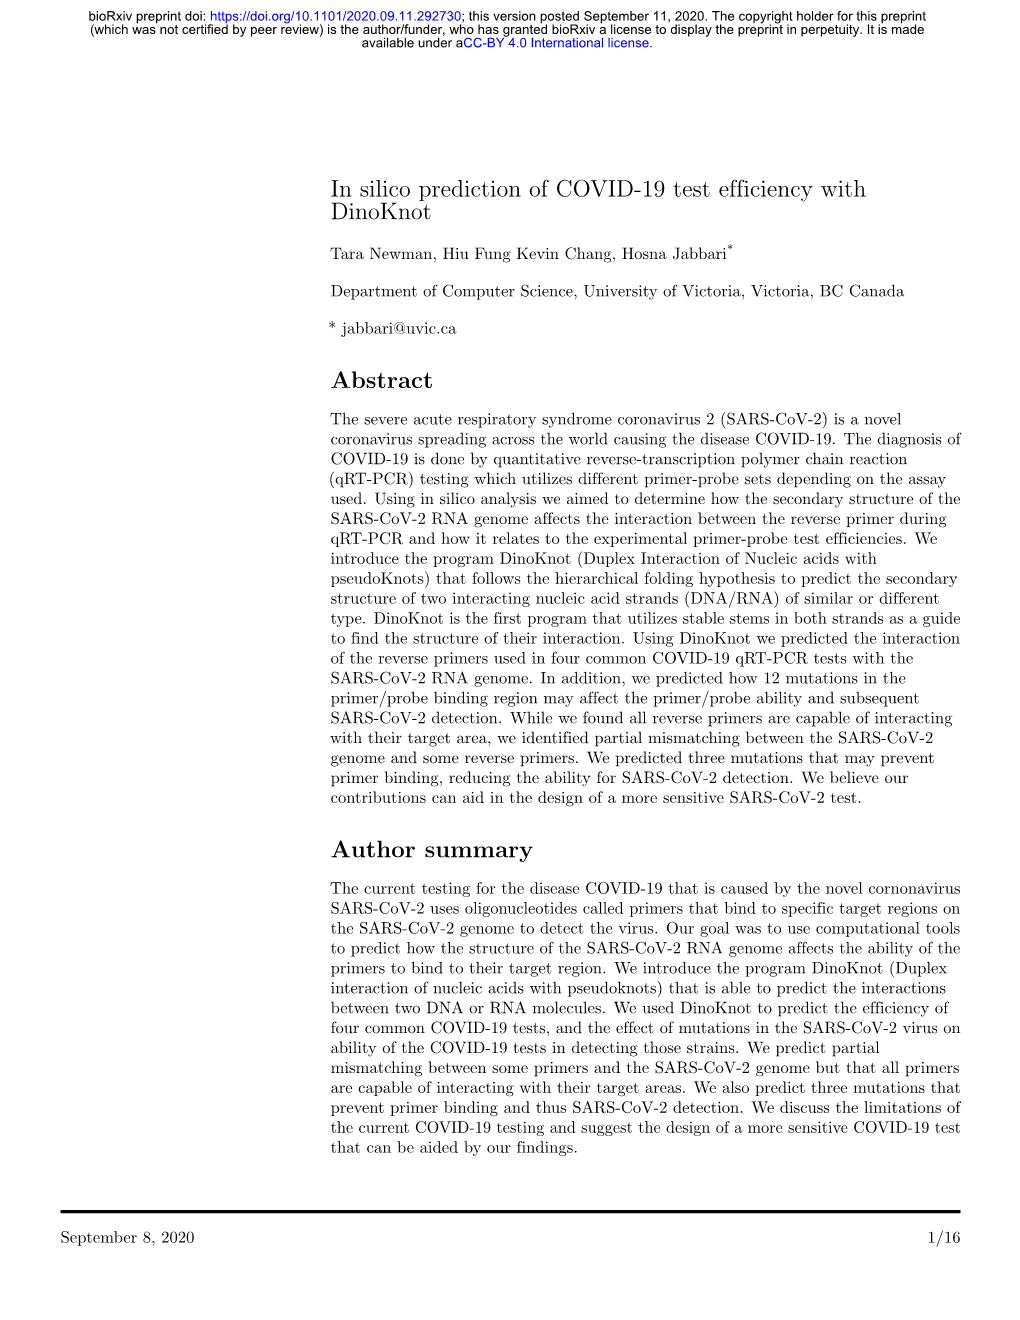 In Silico Prediction of COVID-19 Test Efficiency with Dinoknot